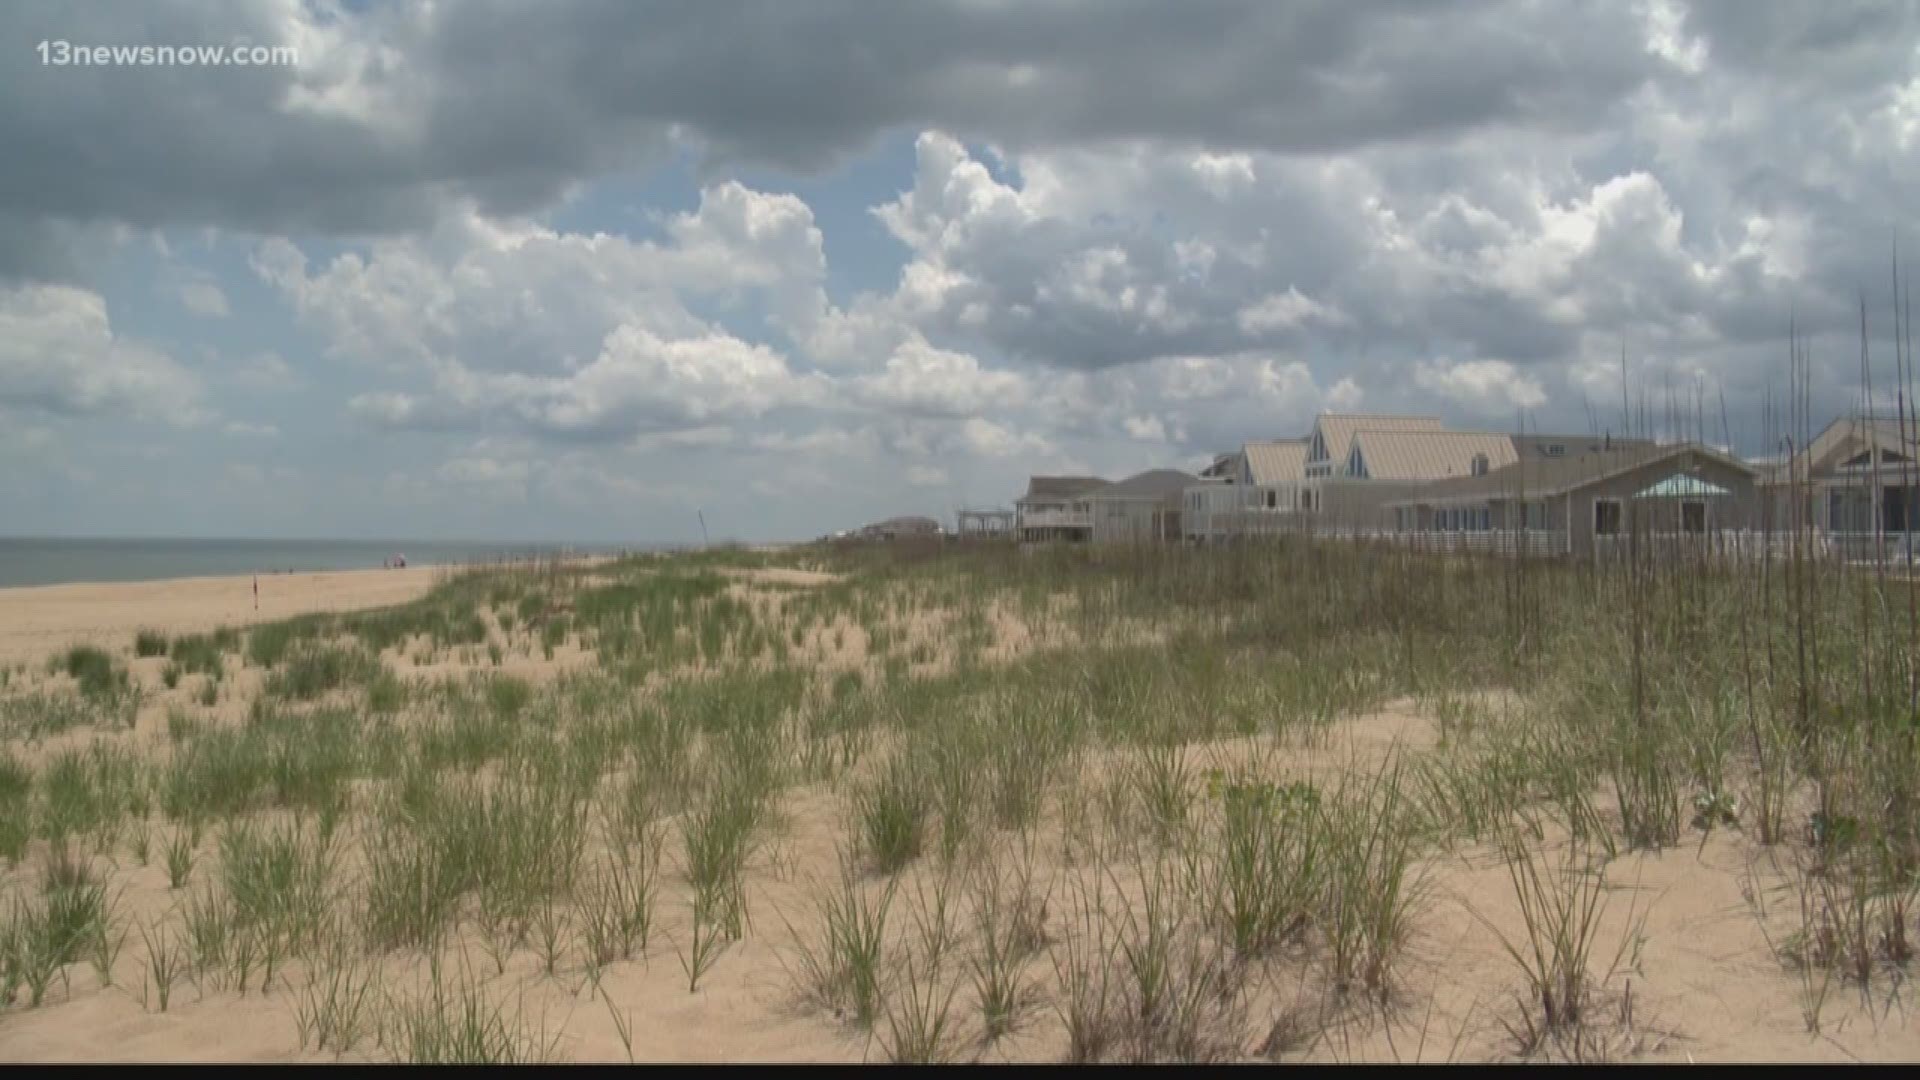 Short-term rental options like Airbnb in Norfolk are taking center stage.